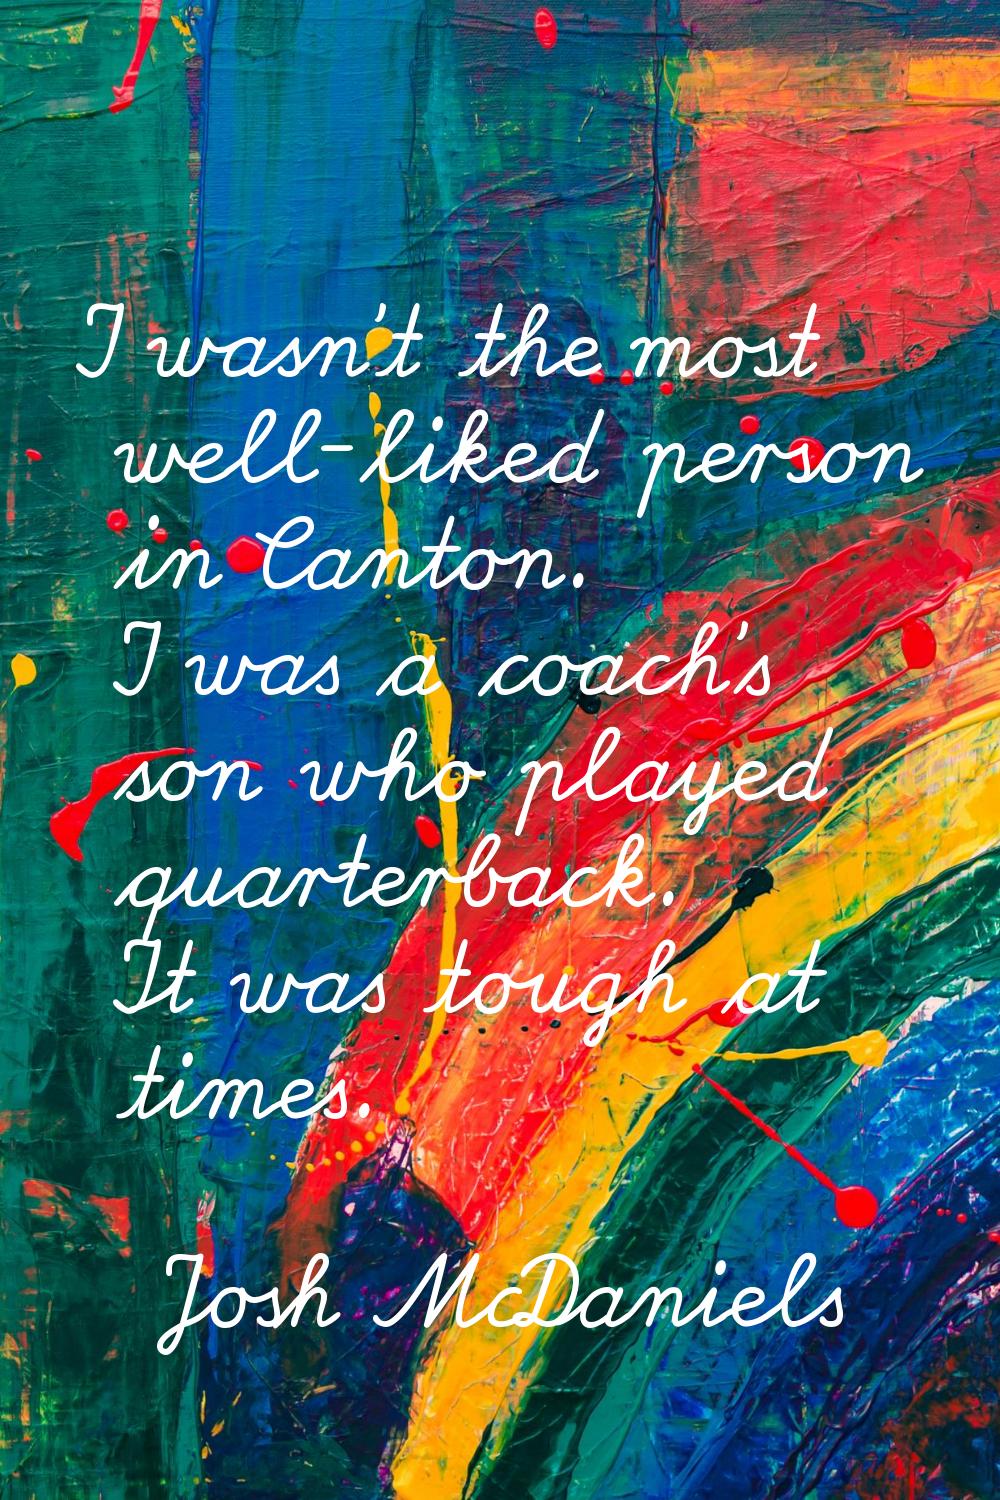 I wasn't the most well-liked person in Canton. I was a coach's son who played quarterback. It was t